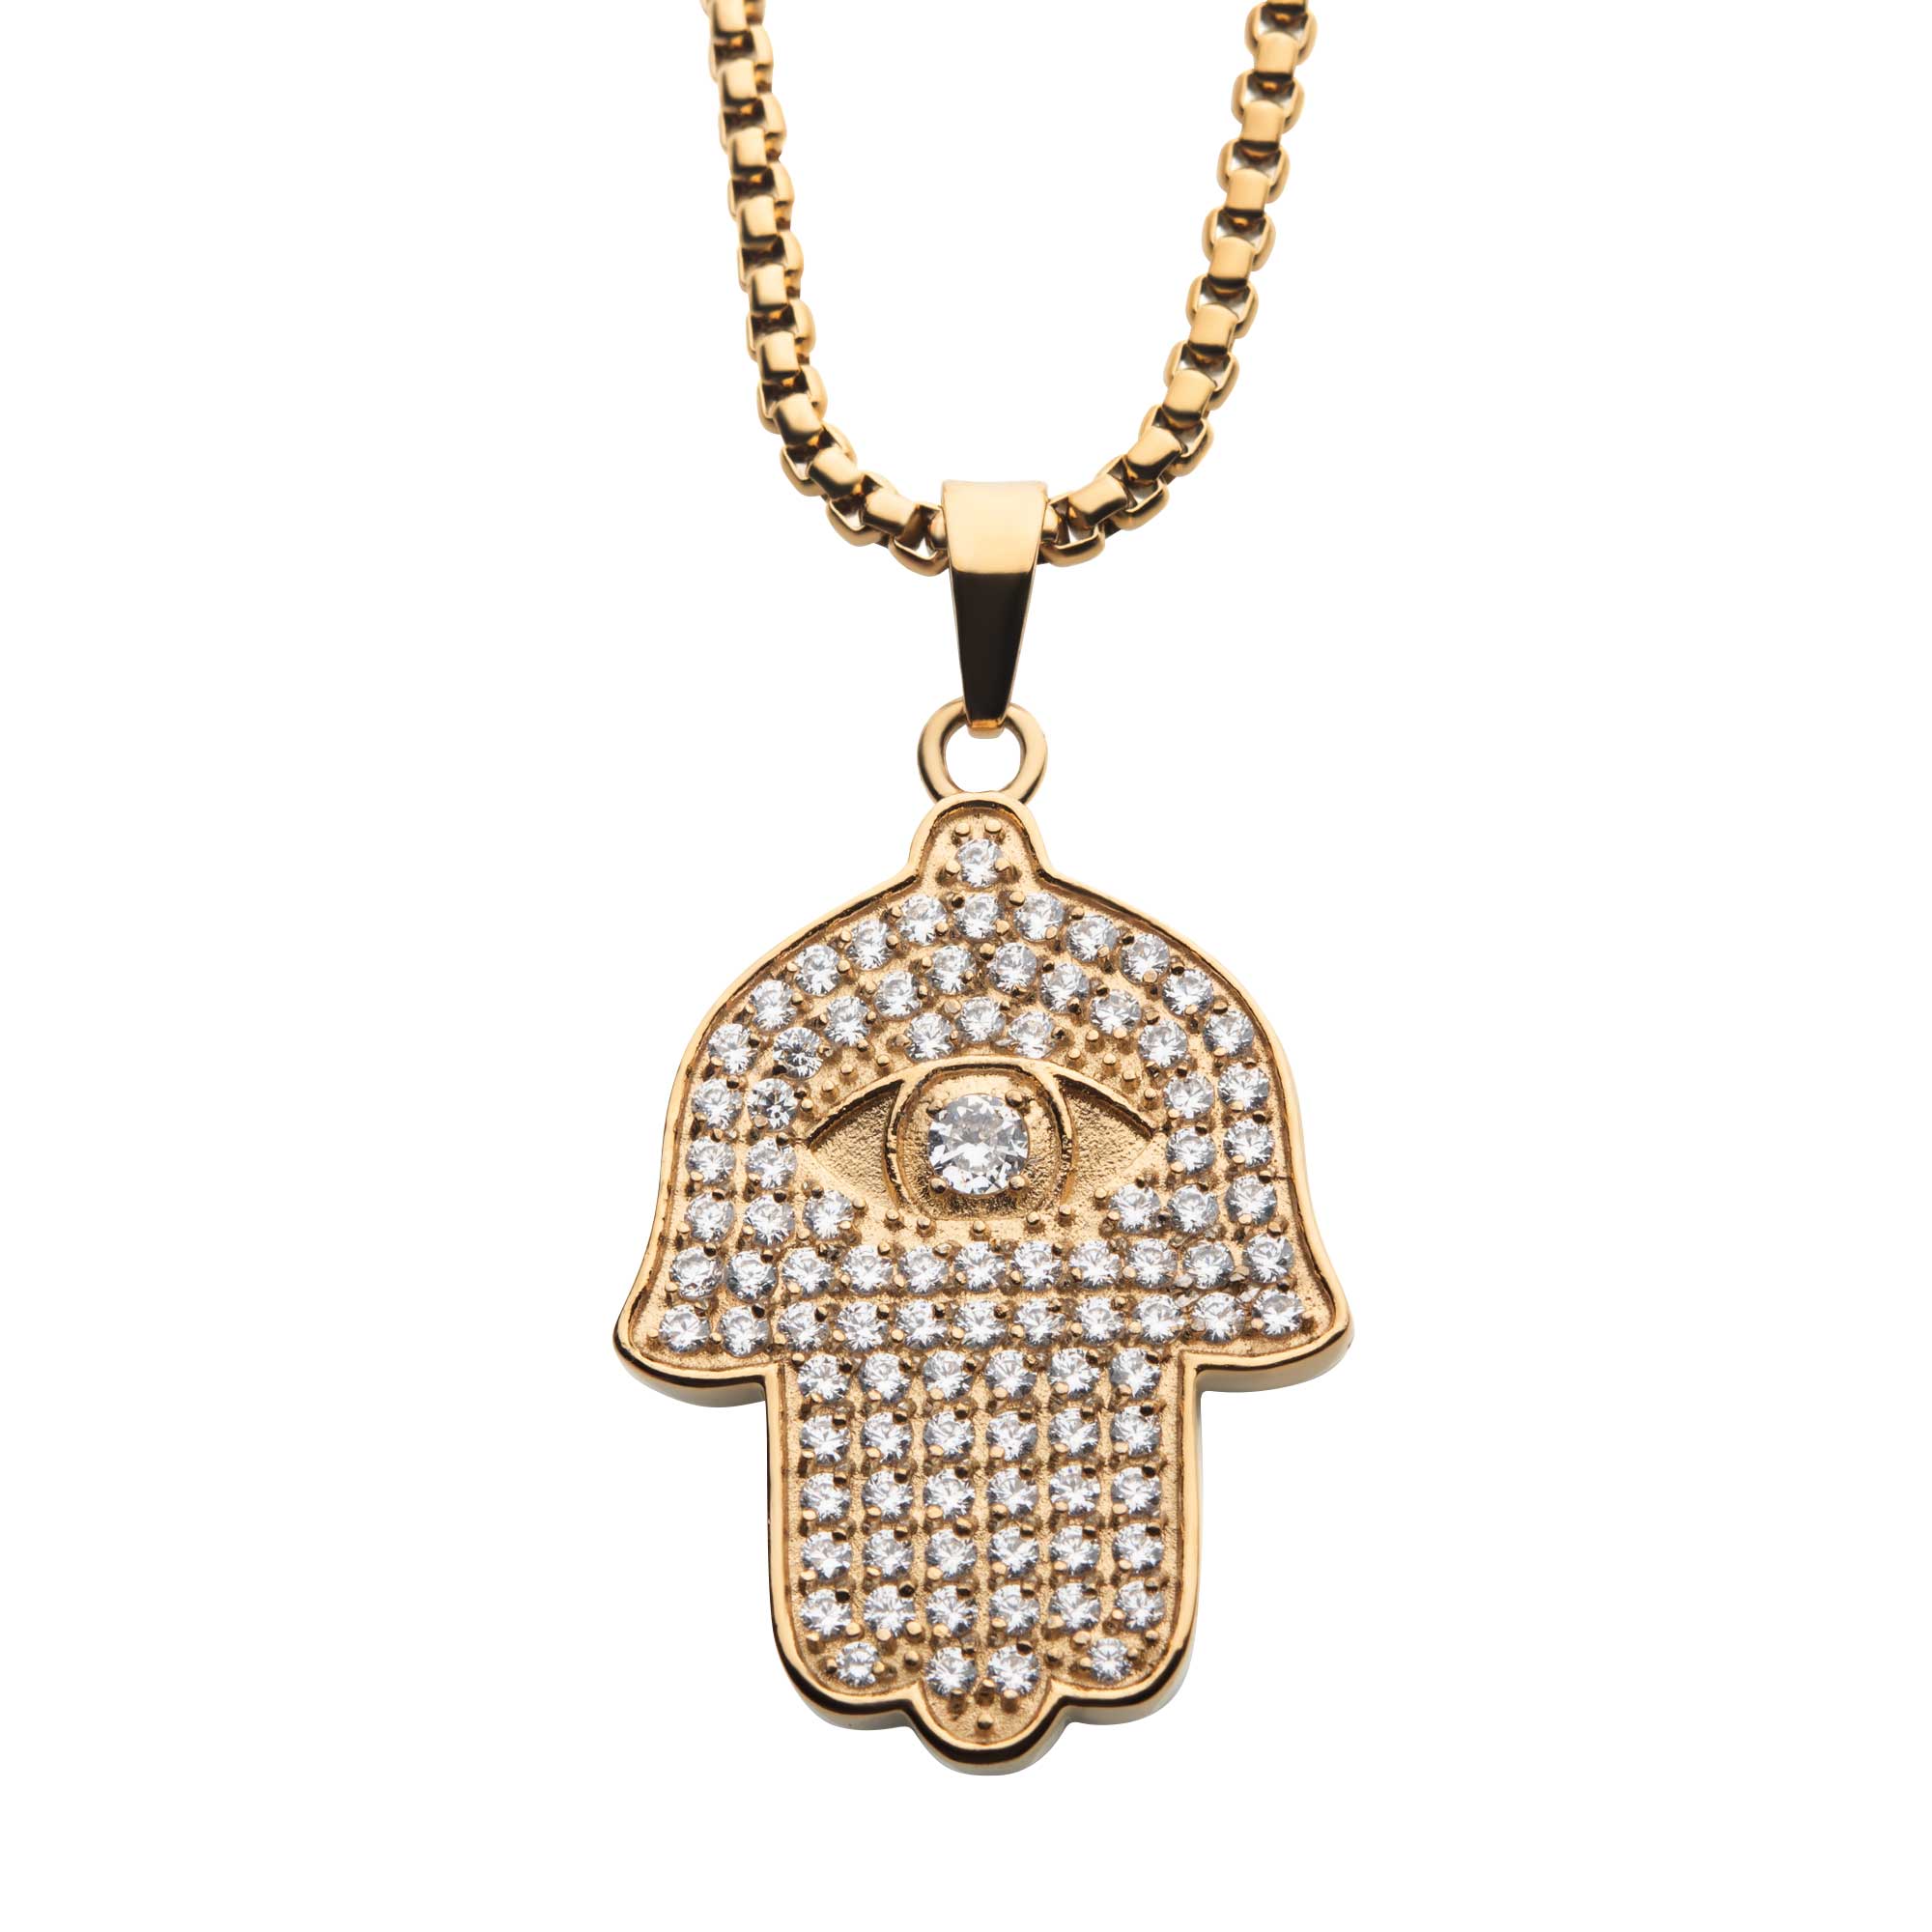 18K Gold Plated with 94pcs CNC Prong Set Clear CZ Hamsa Pendant, with Gold Plated Box Chain Morin Jewelers Southbridge, MA